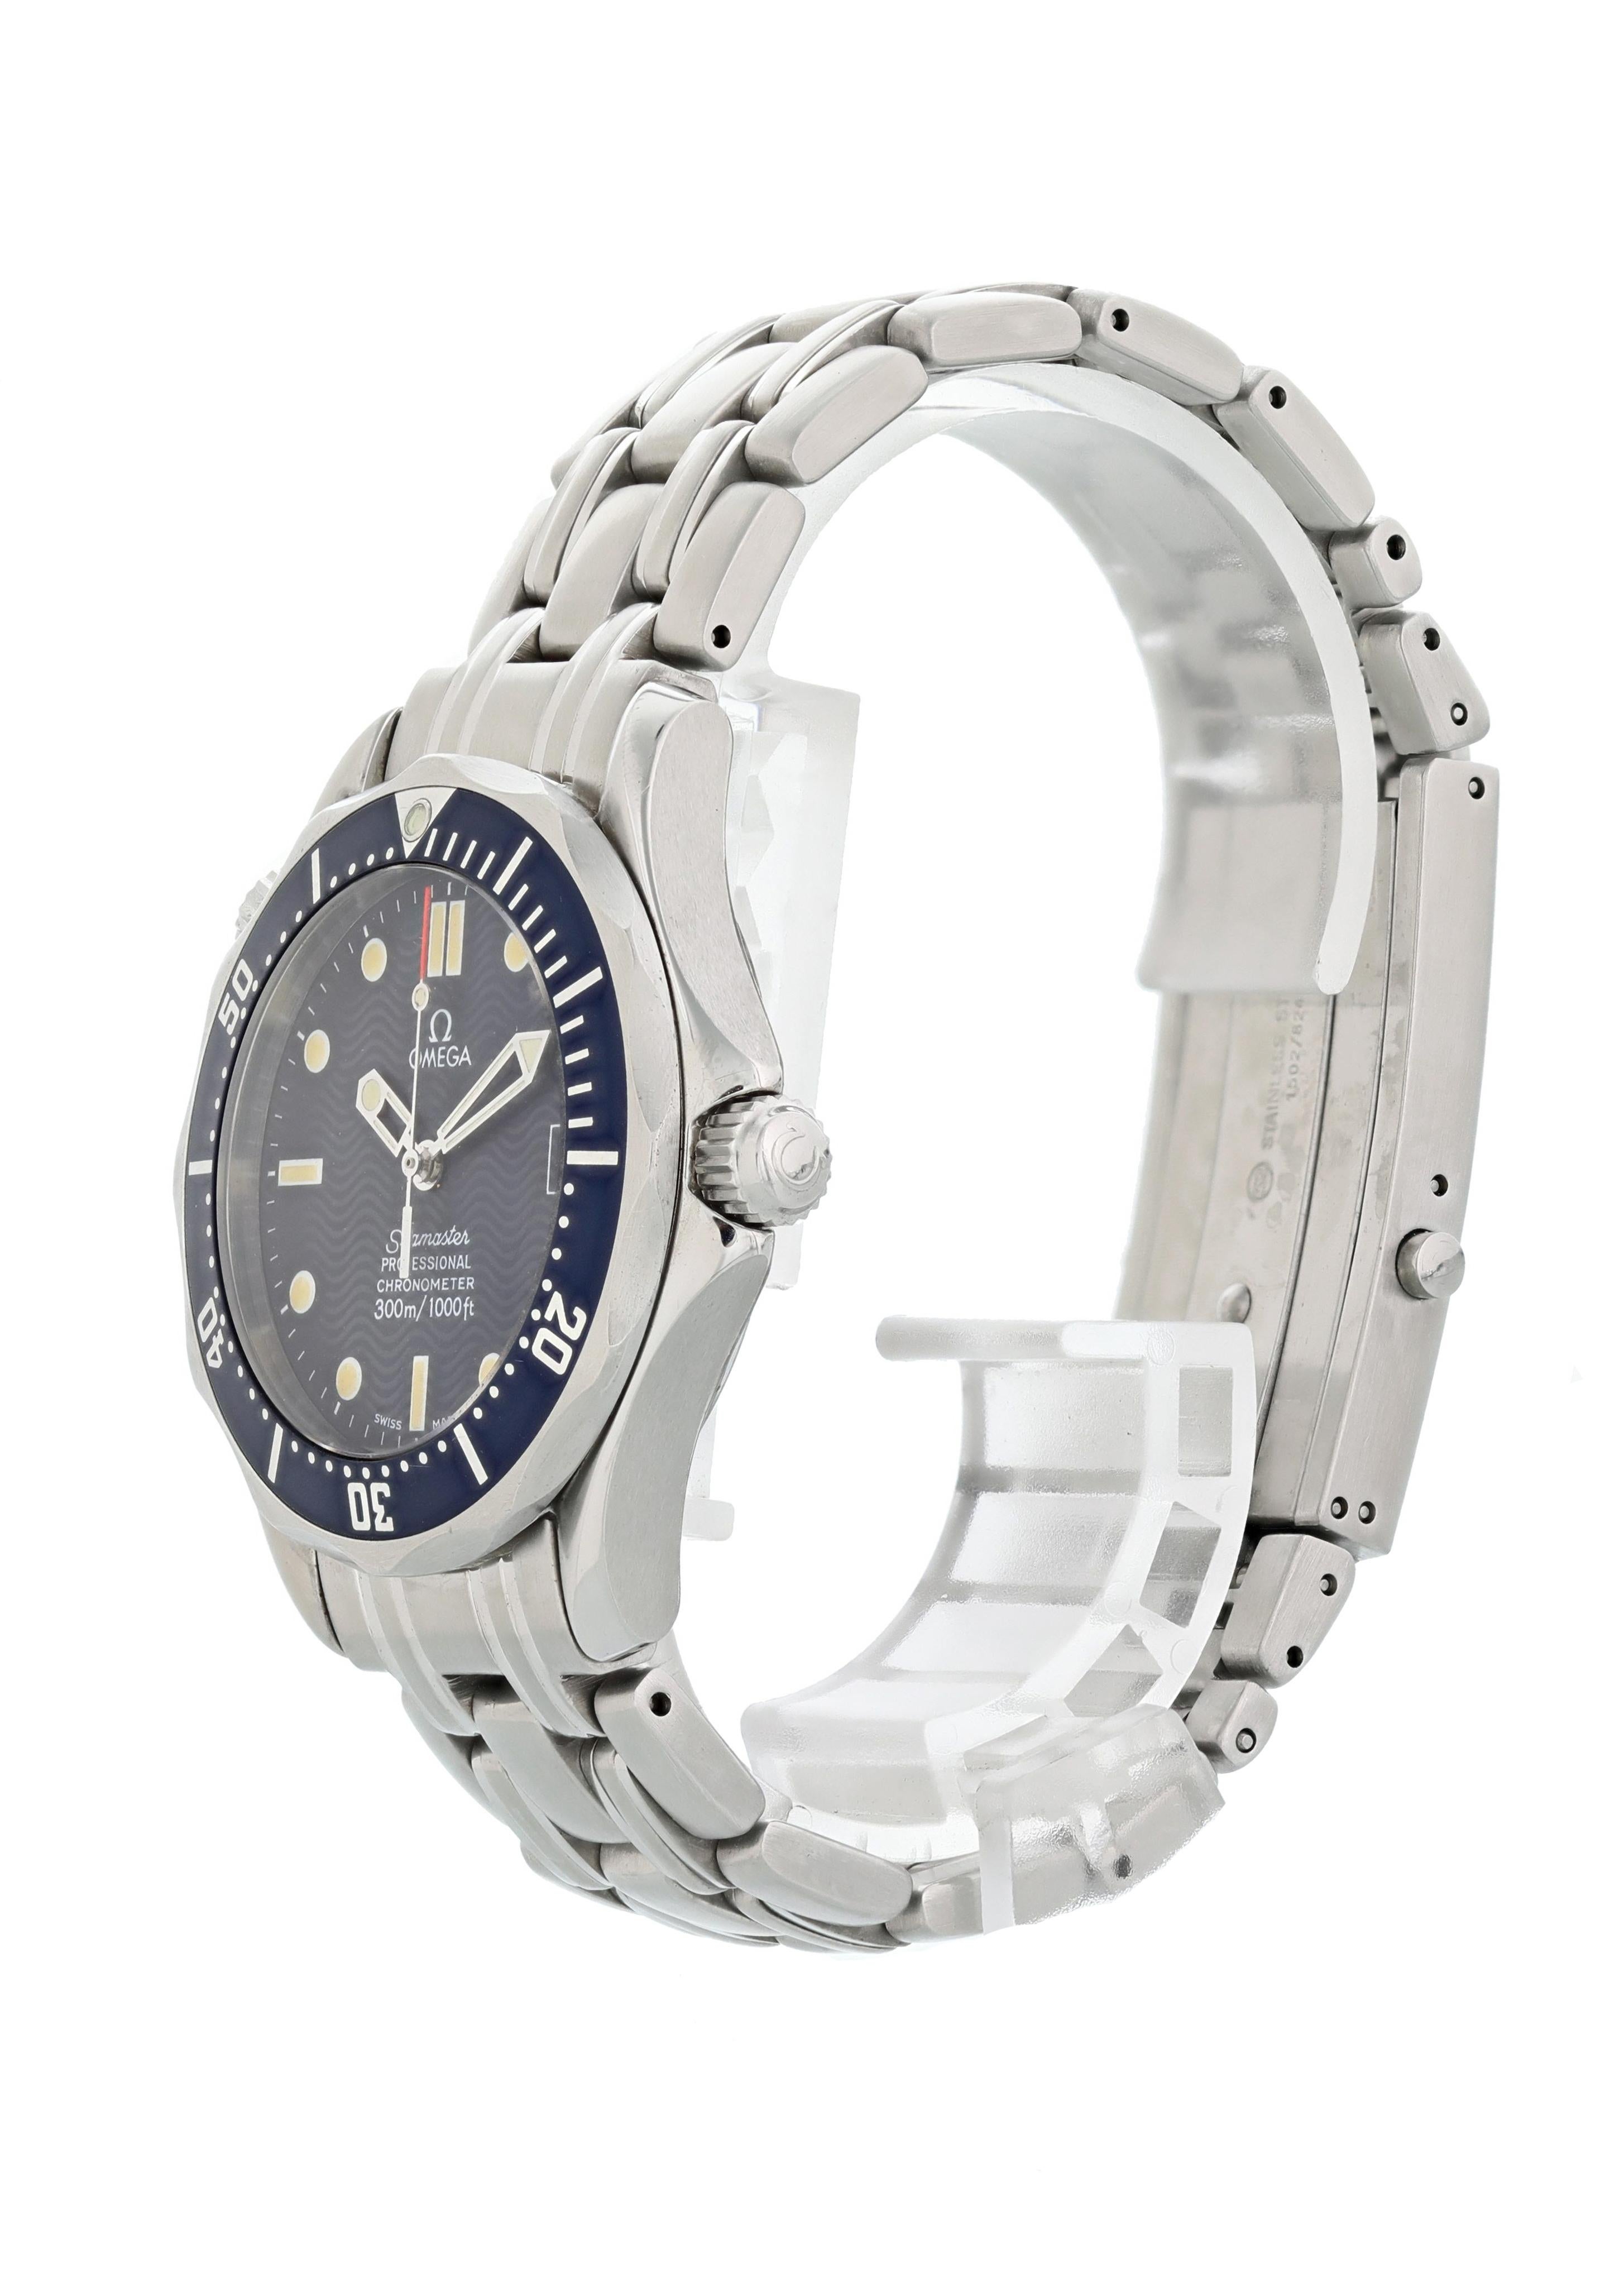 Omega Seamaster professional 2551.80.00 Mid-Size Watch. 36mm stainless steel case. Unidirectional stainless steel bezel with blue bezel insert. Blue wave dial with date display by the 3 o'clock position. Stainless steel bracelet with a double push